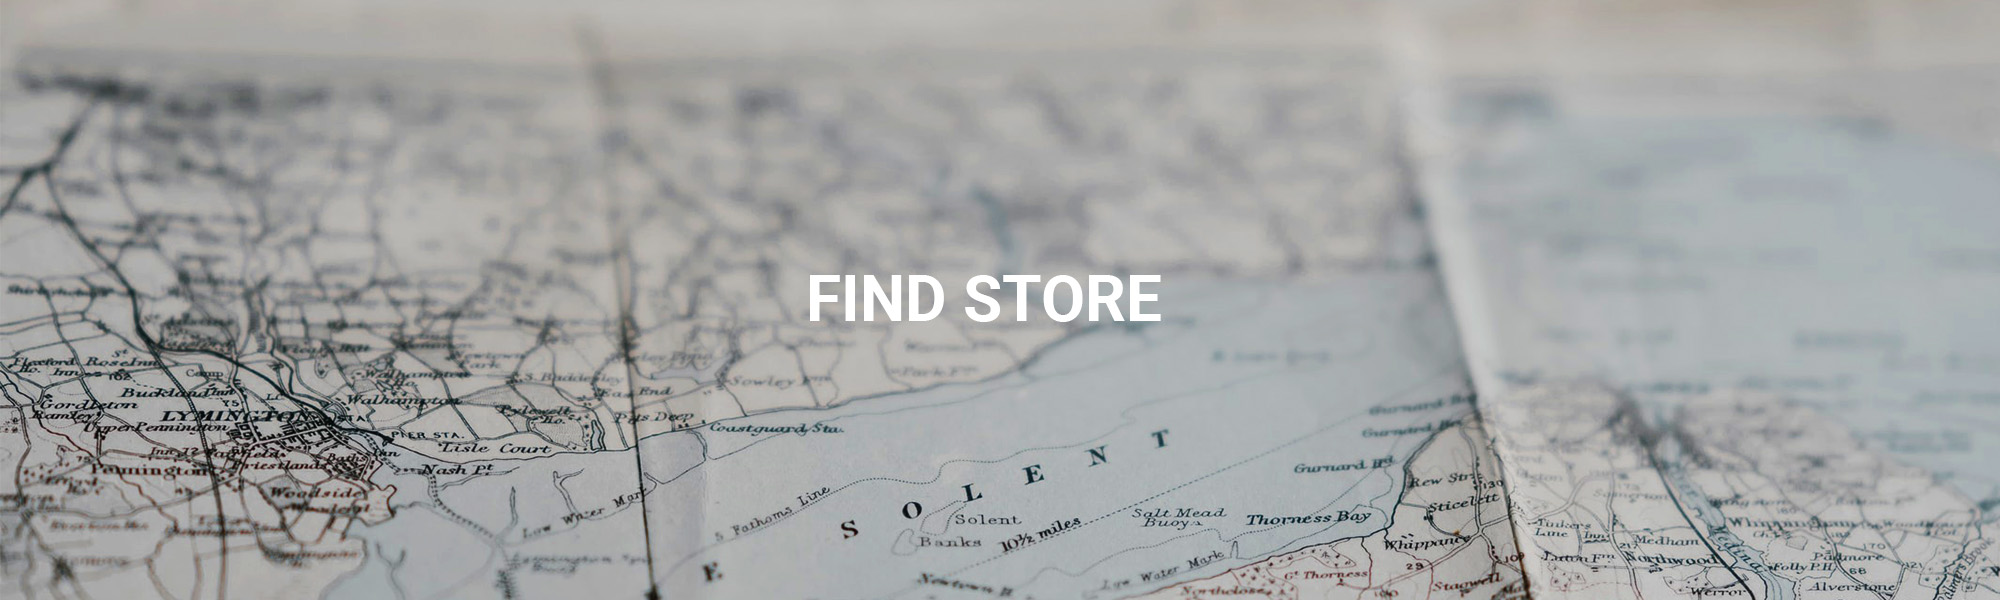 Find Store_hunttech